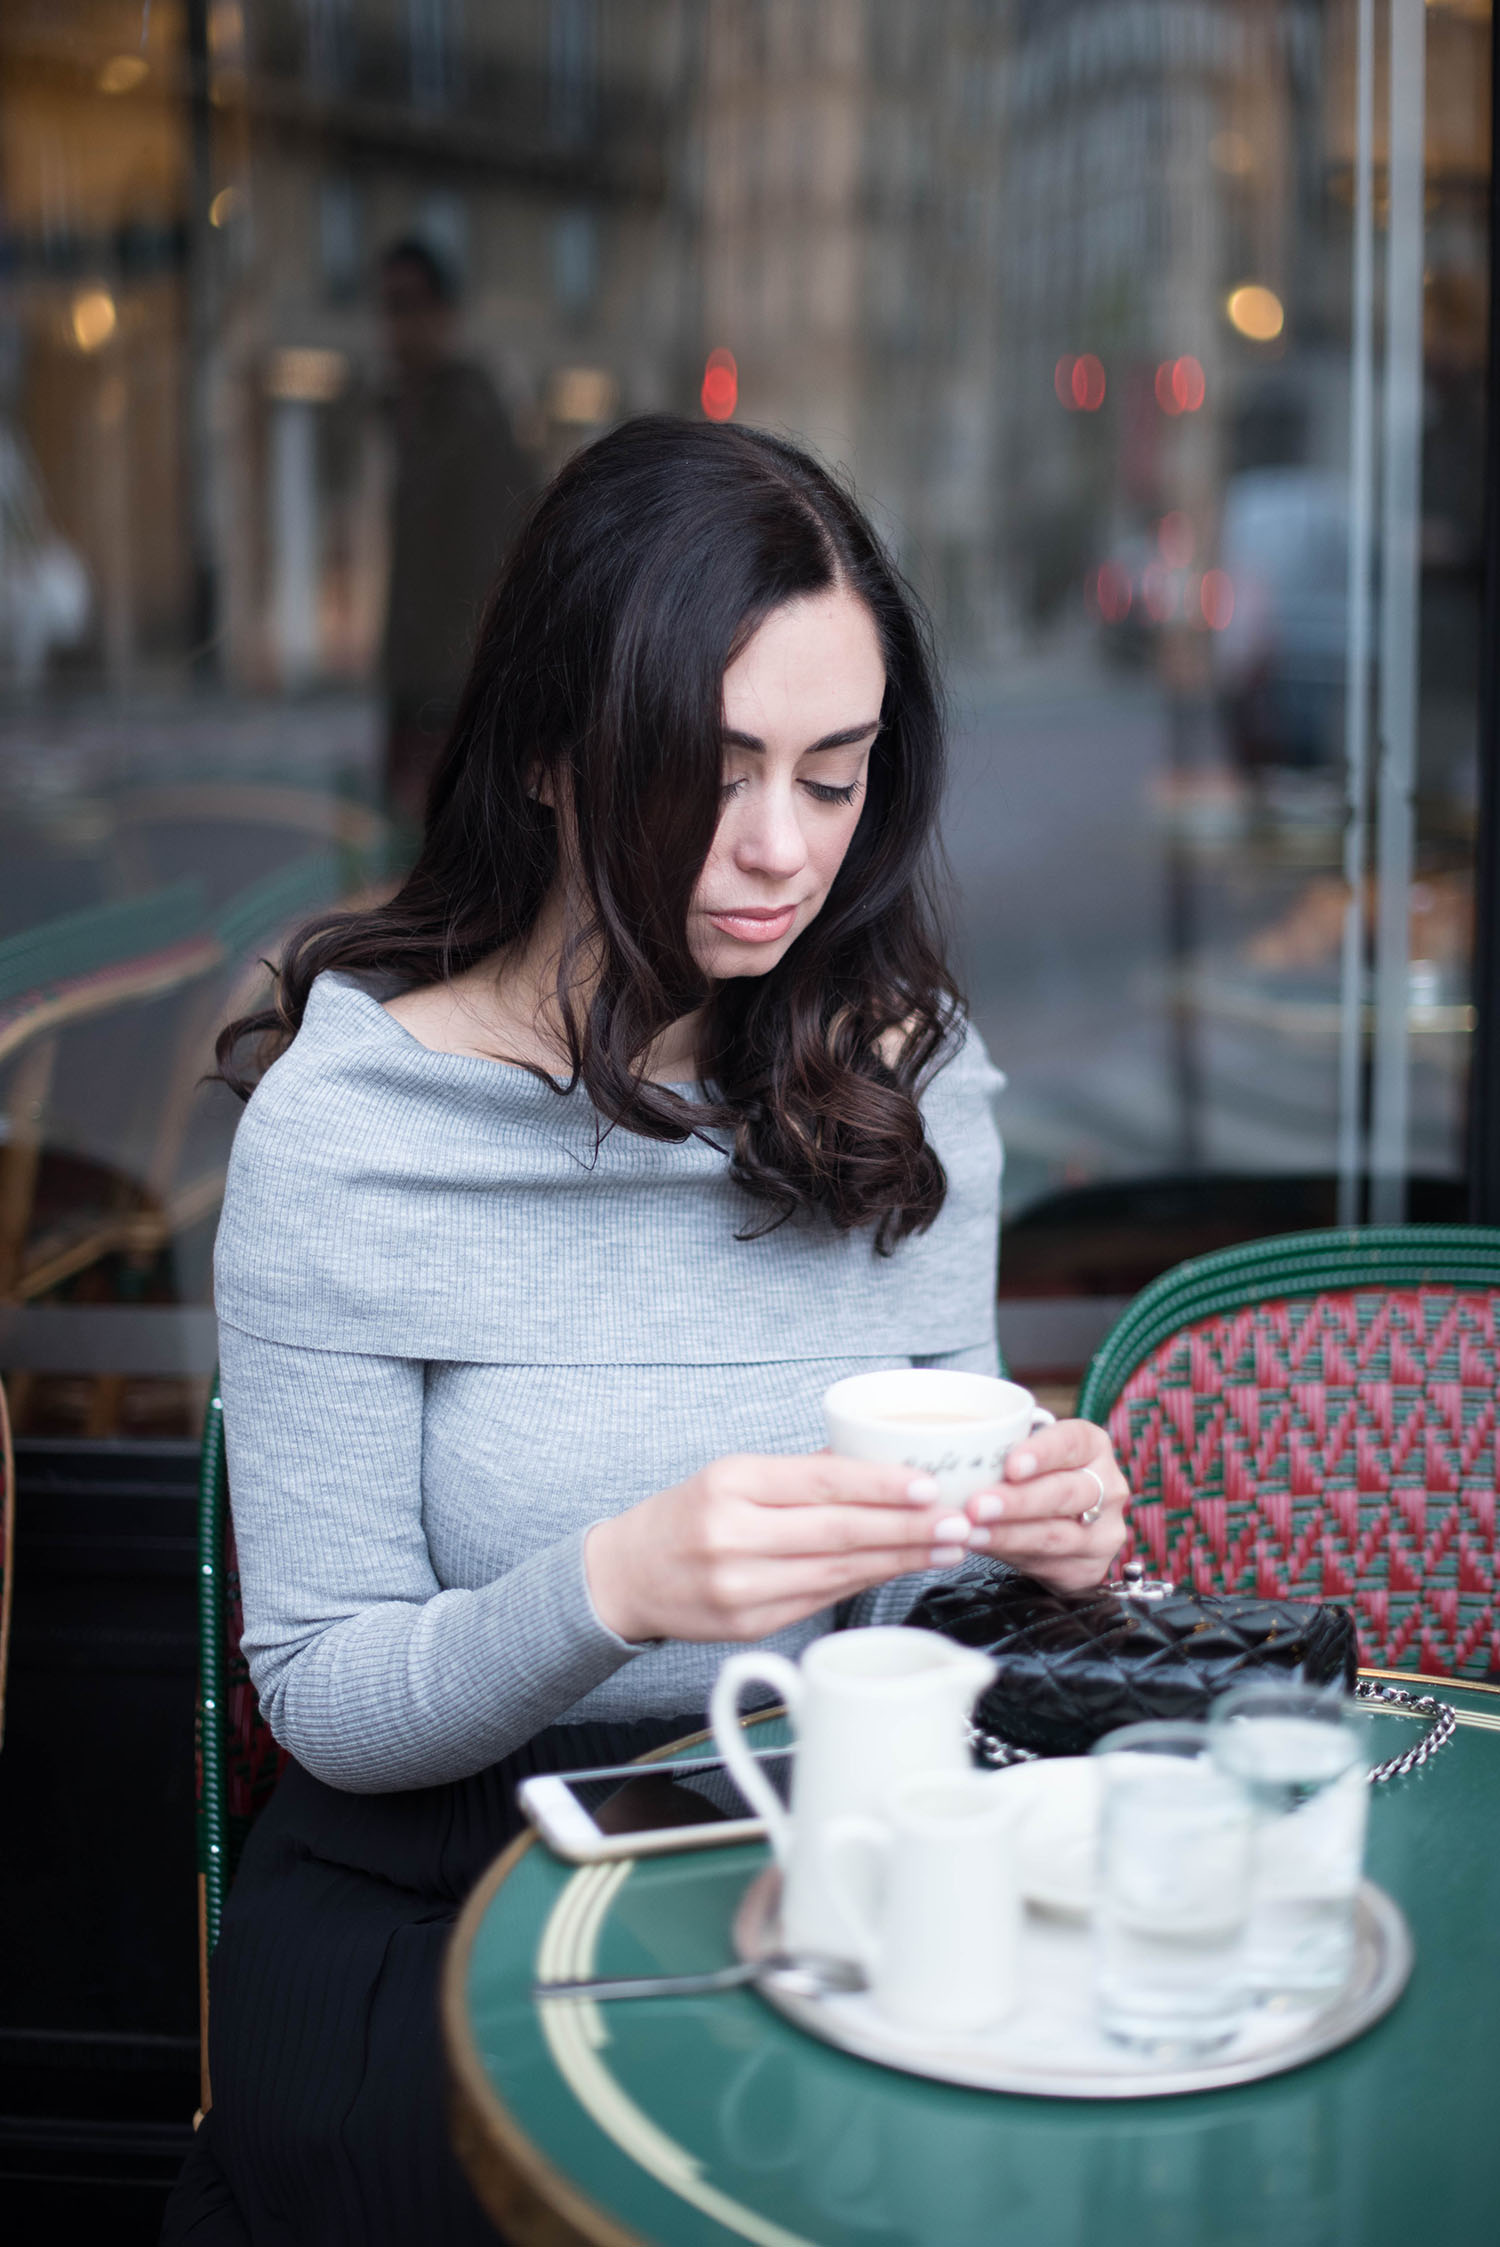 Portrait of style blogger Cee Fardoe of Coco & Vera holding a cup of coffee at the Cafe de Flore